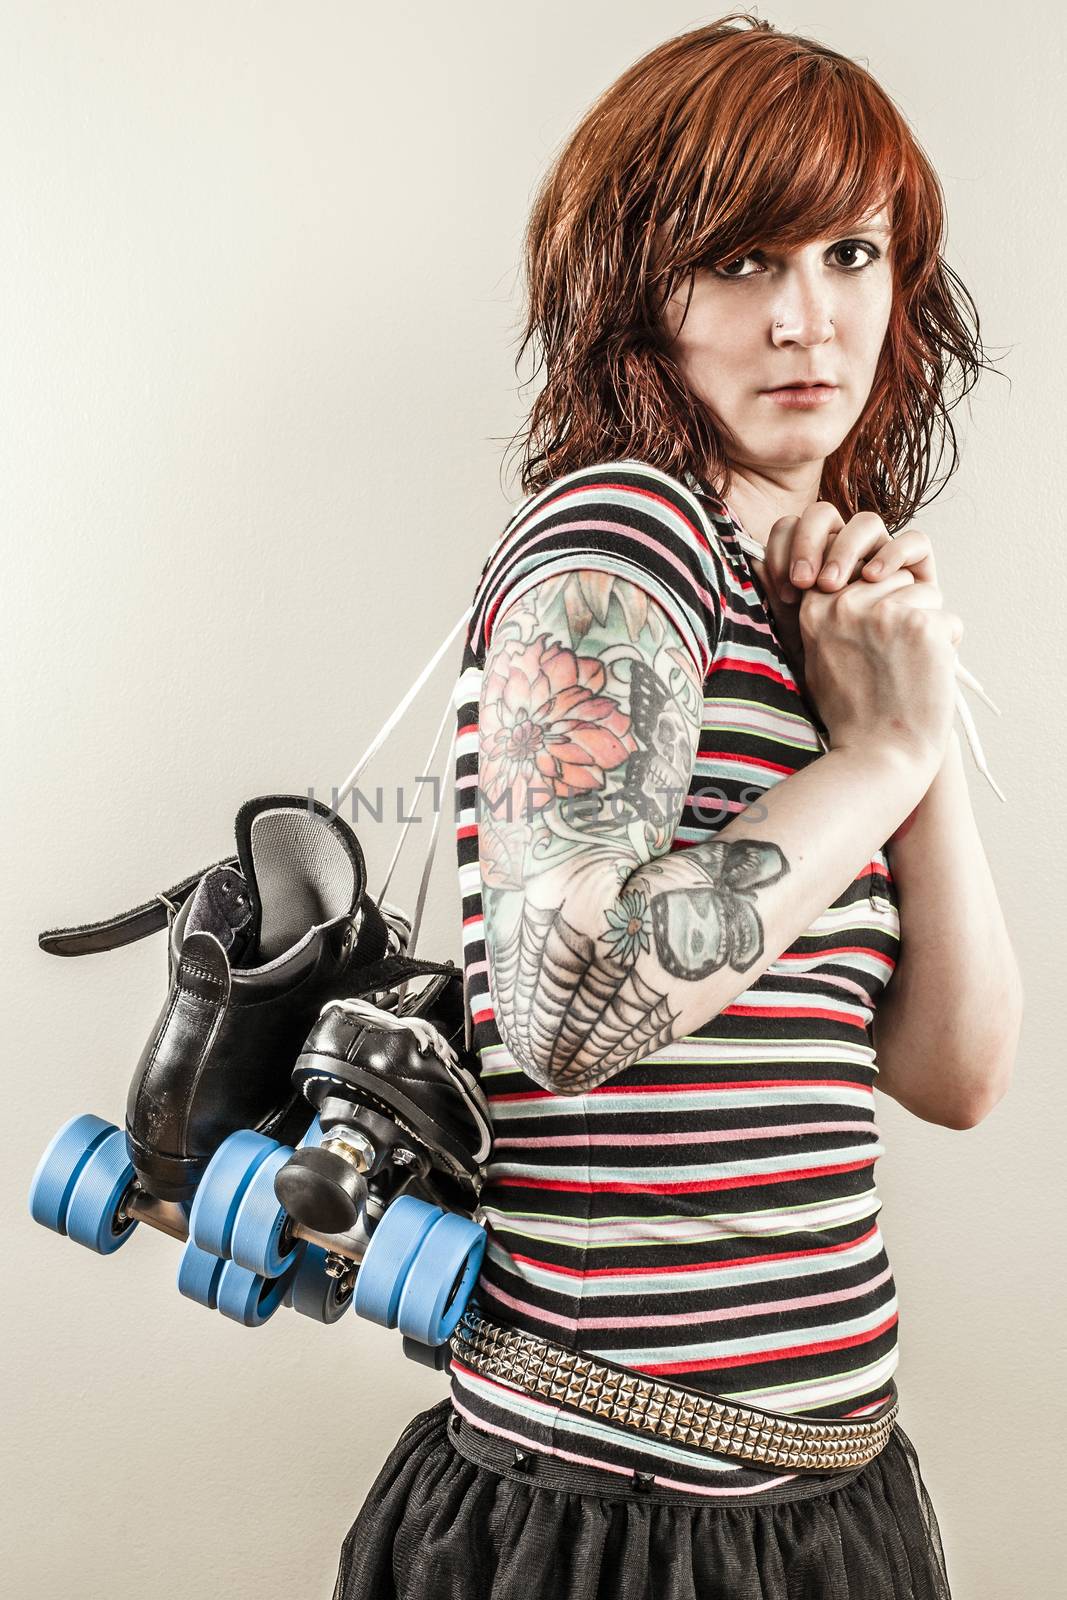 Photo of a roller derby girl holding her skates by the laces.